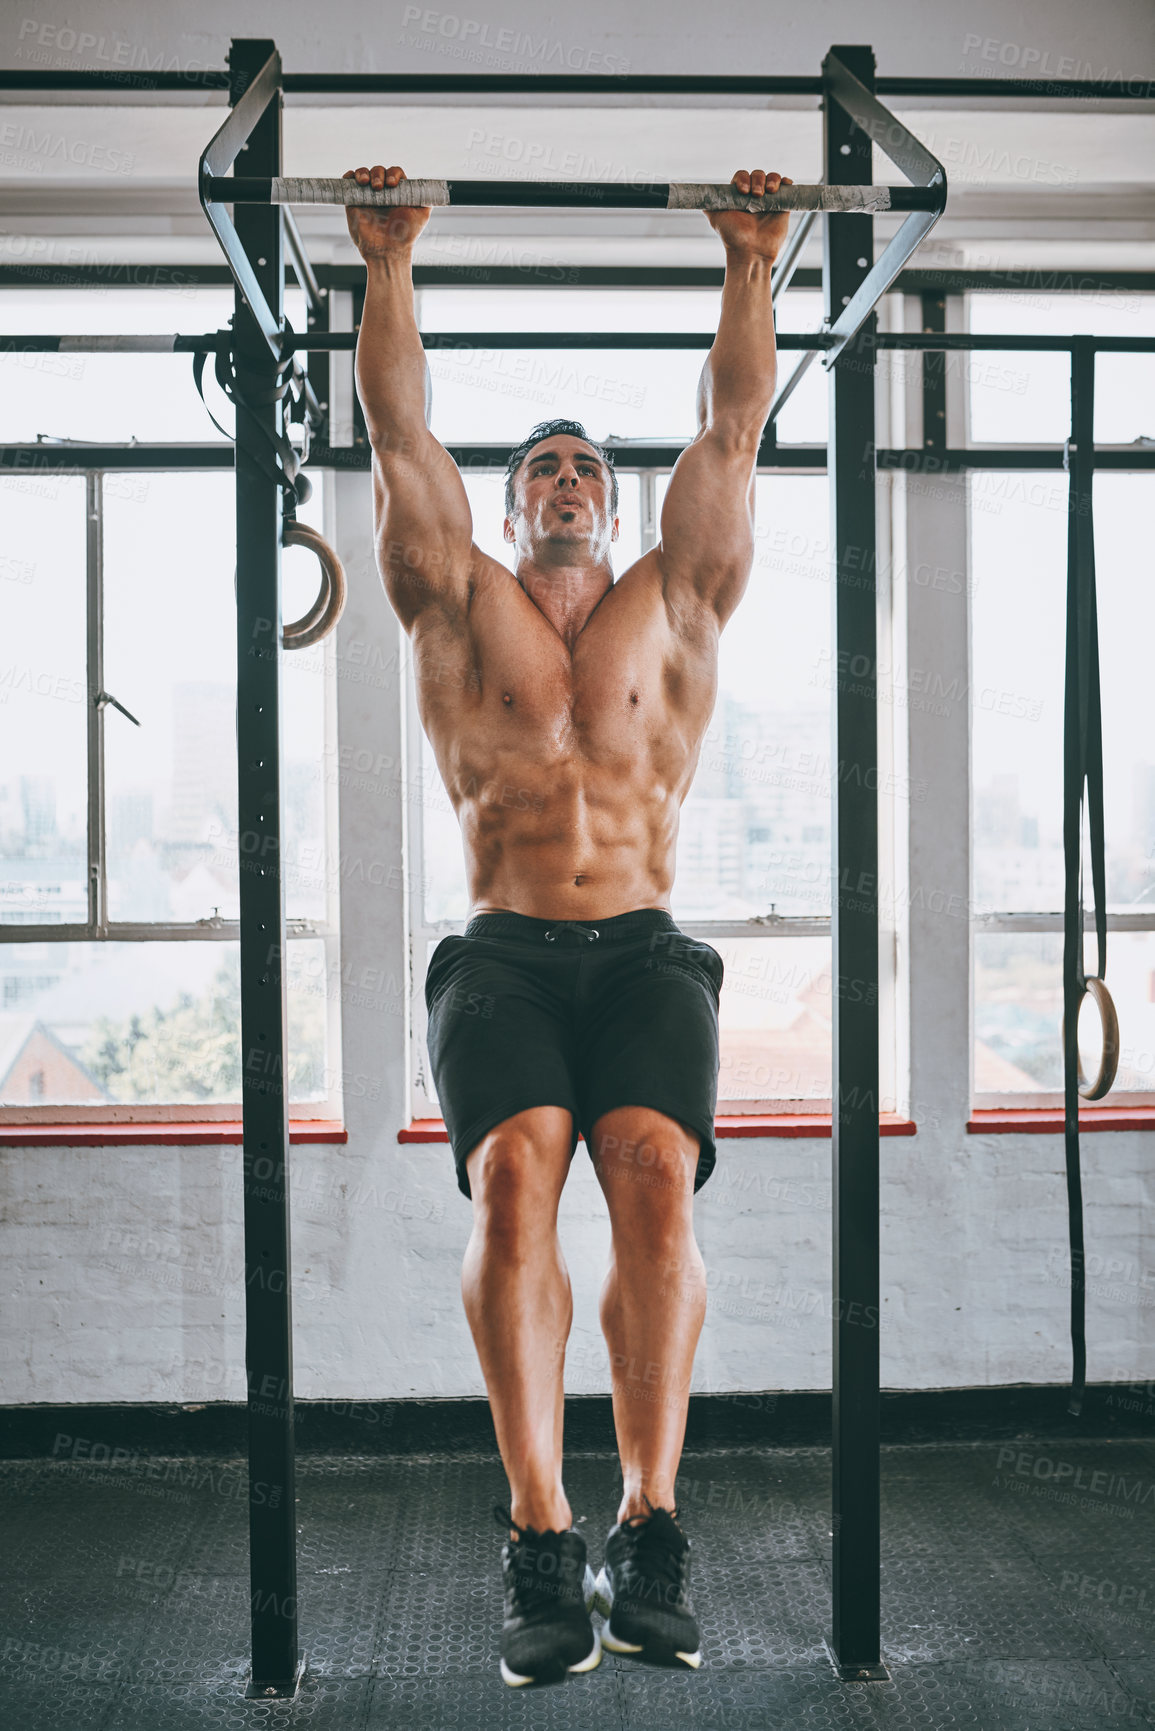 Buy stock photo Shot of a muscular man working out in a gym